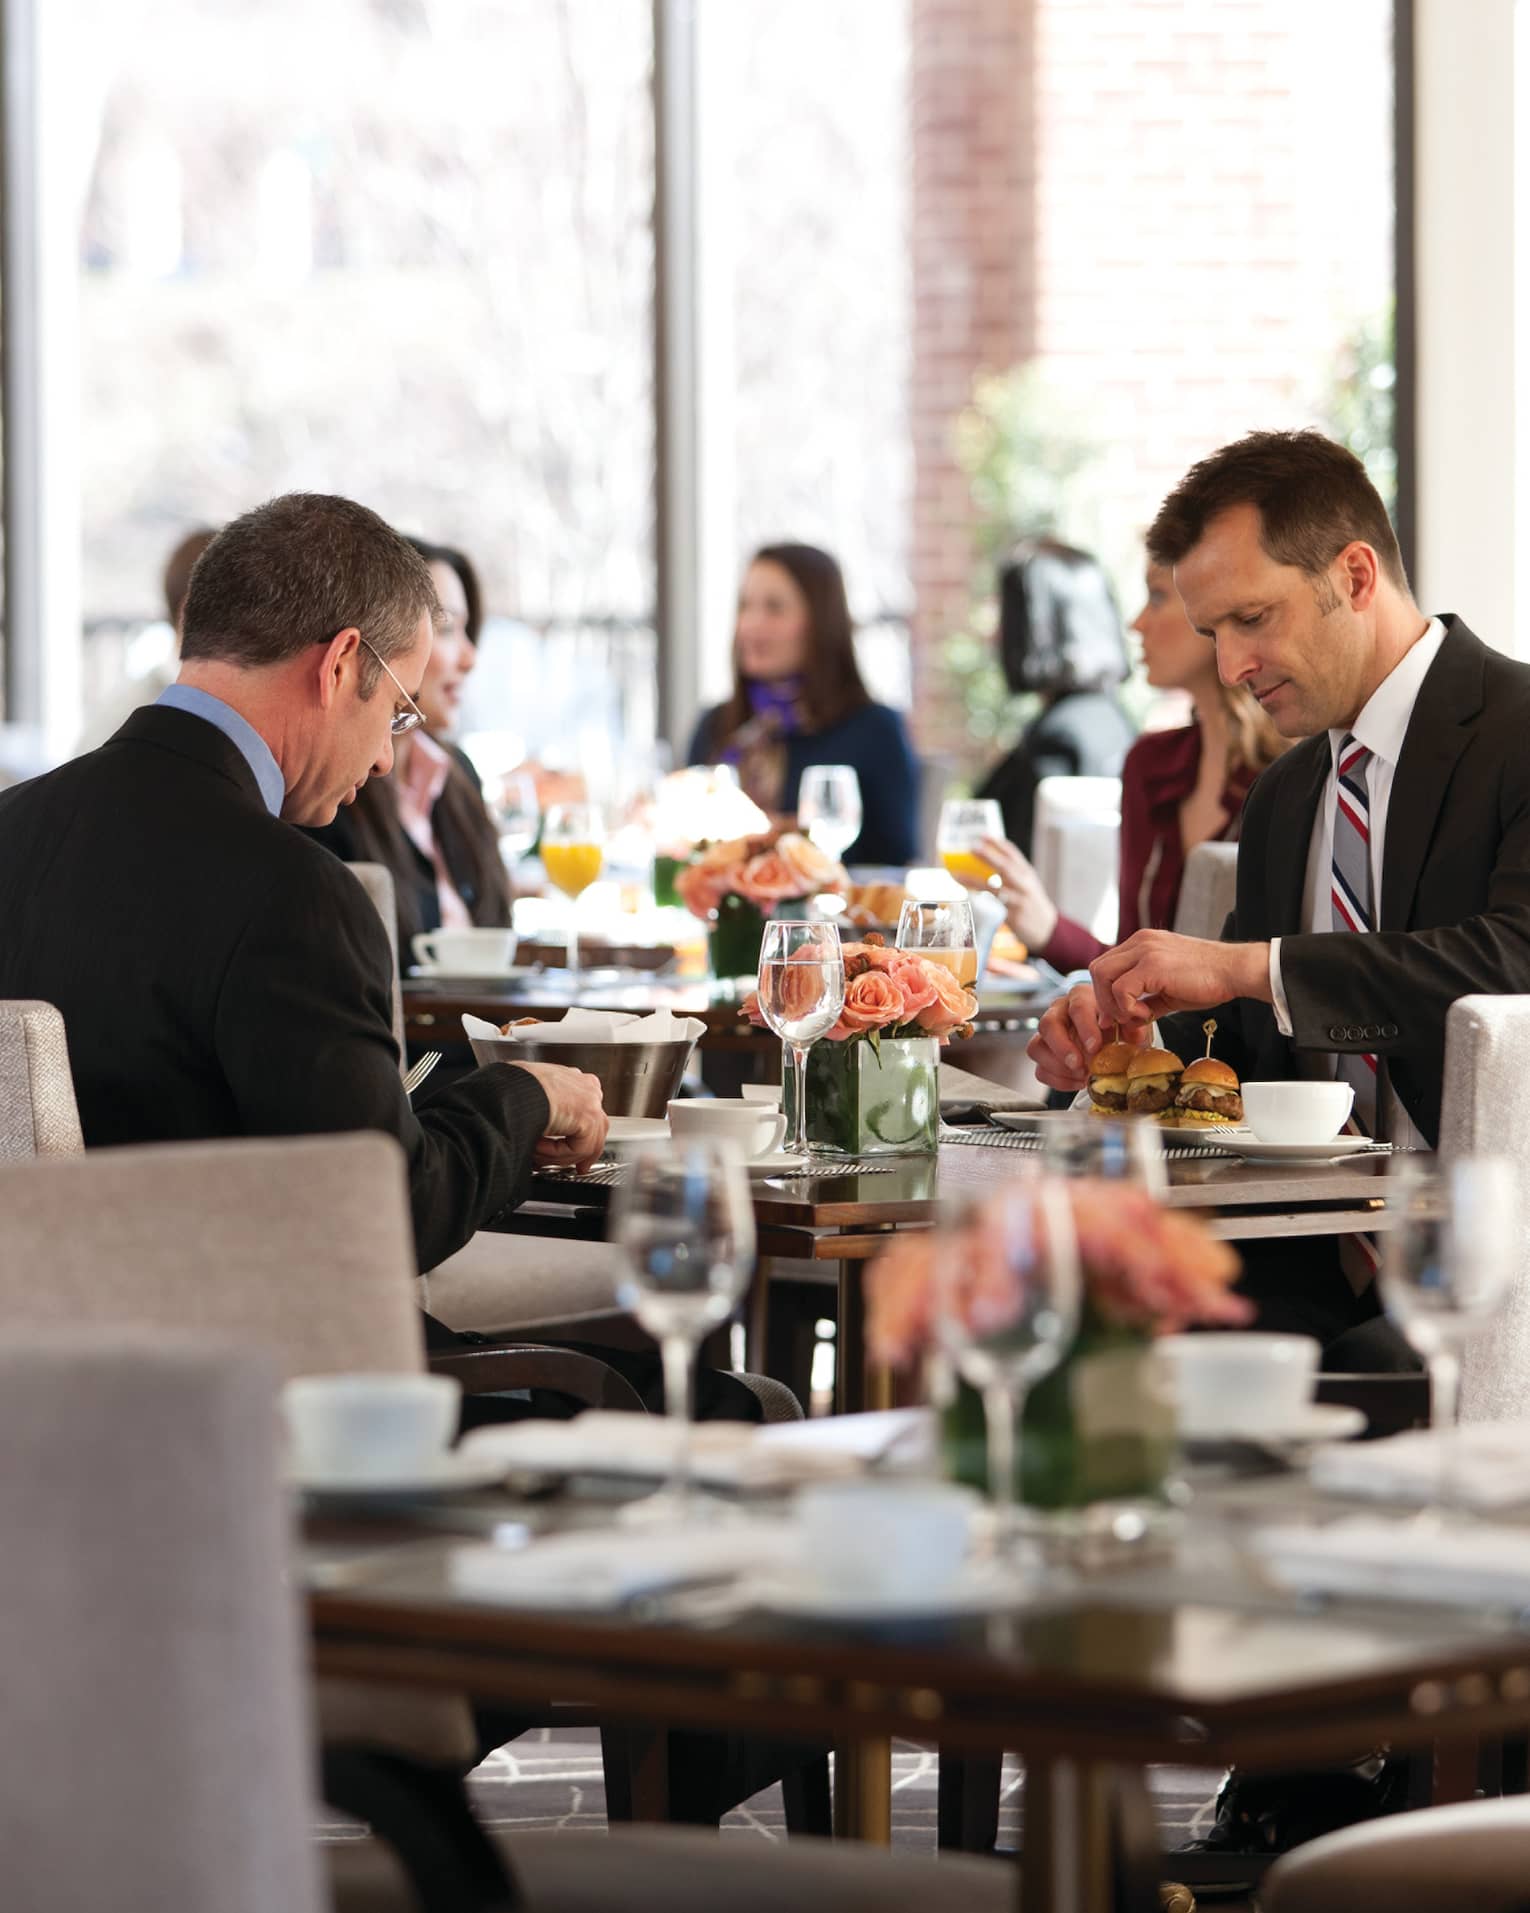 Men wearing suits dining around table in sunny Seasons restaurant, busy dining room in background